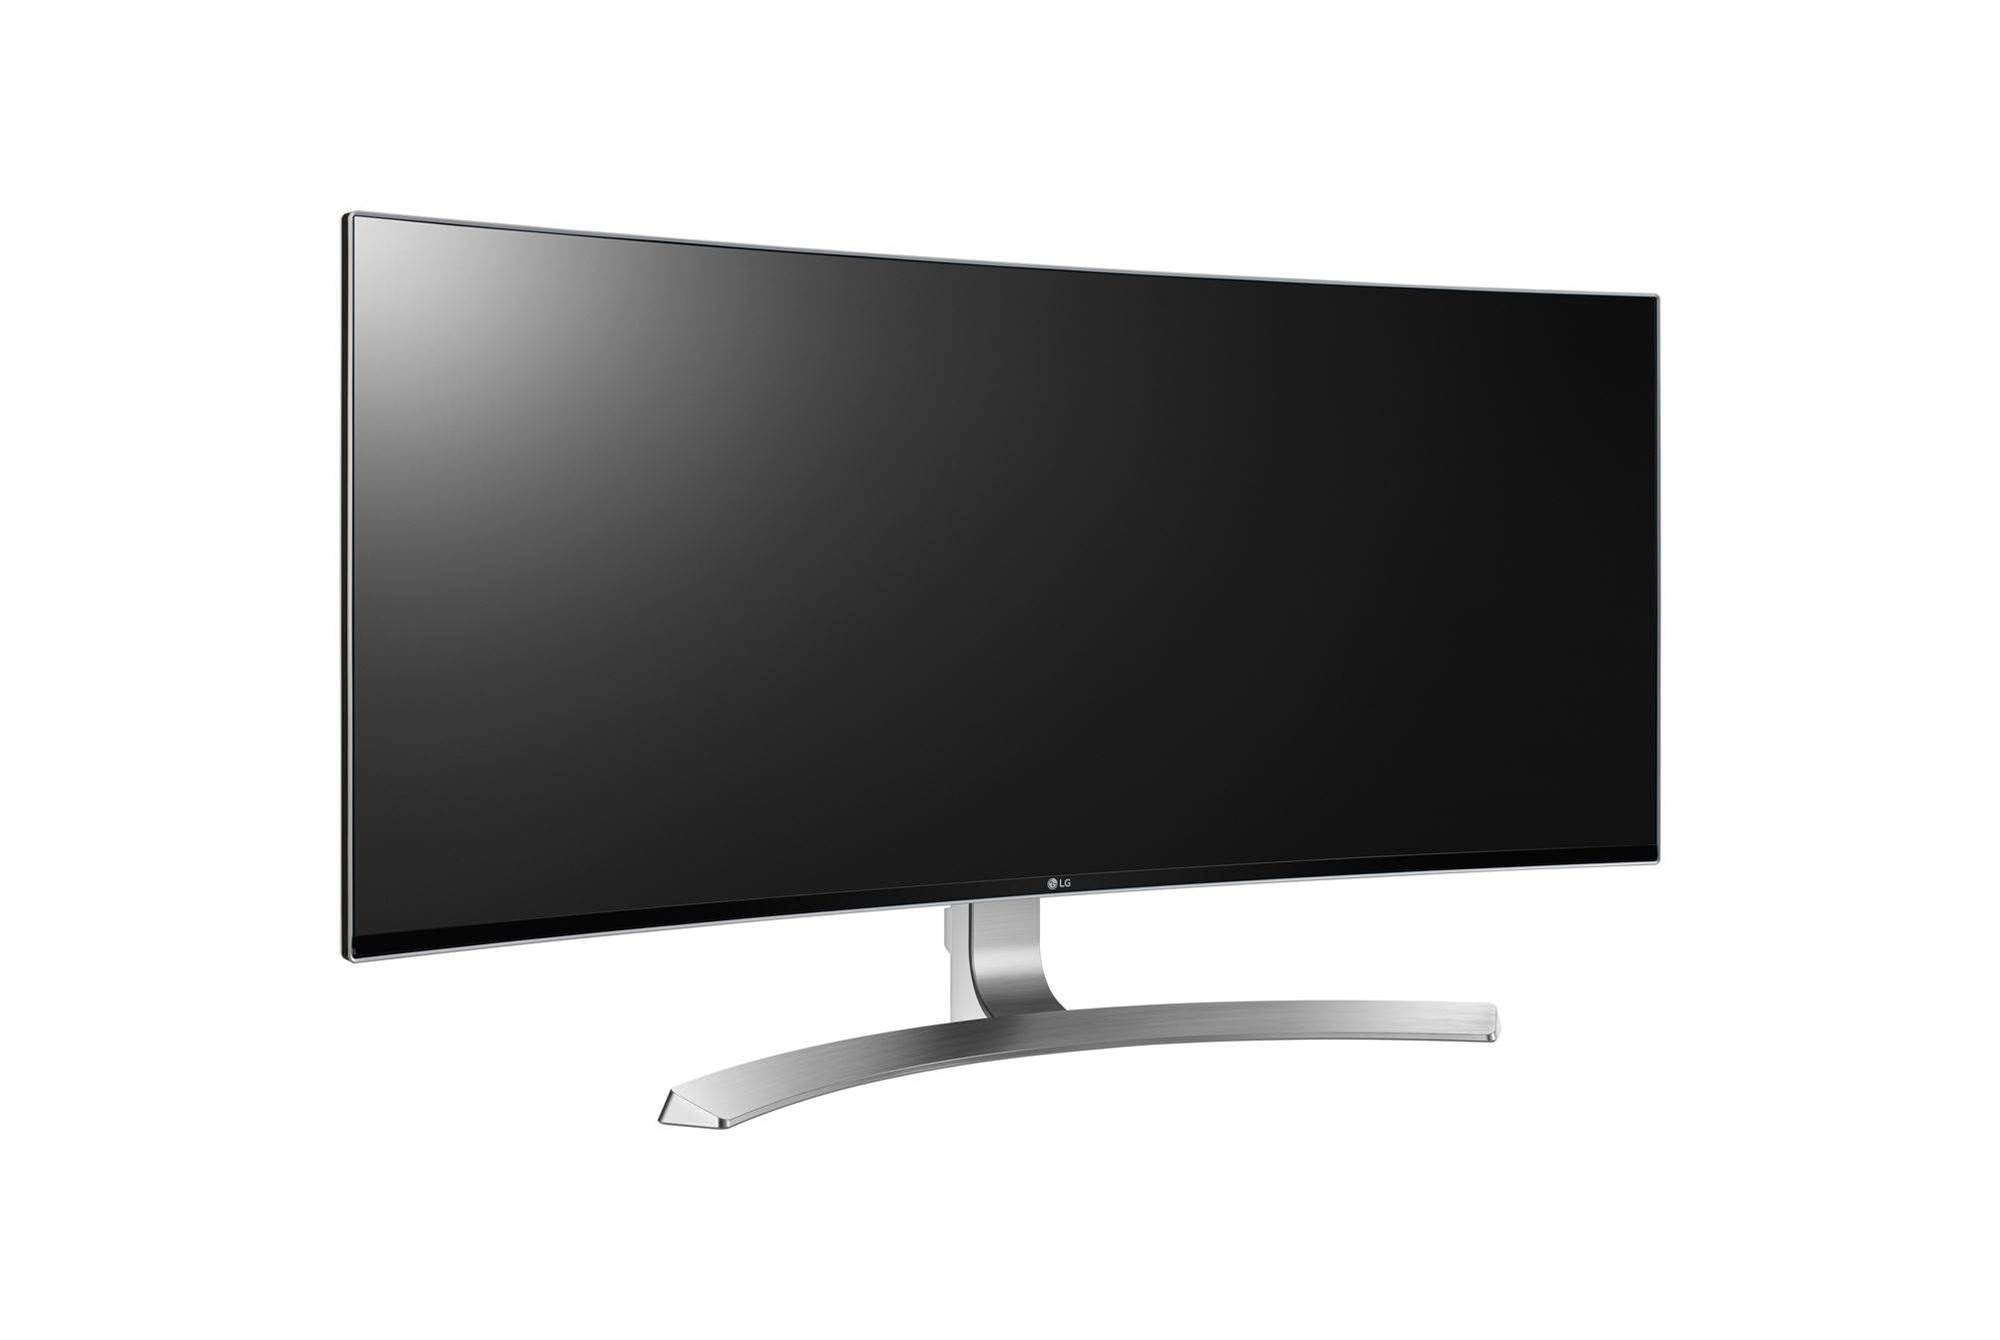 curved monitor micro center